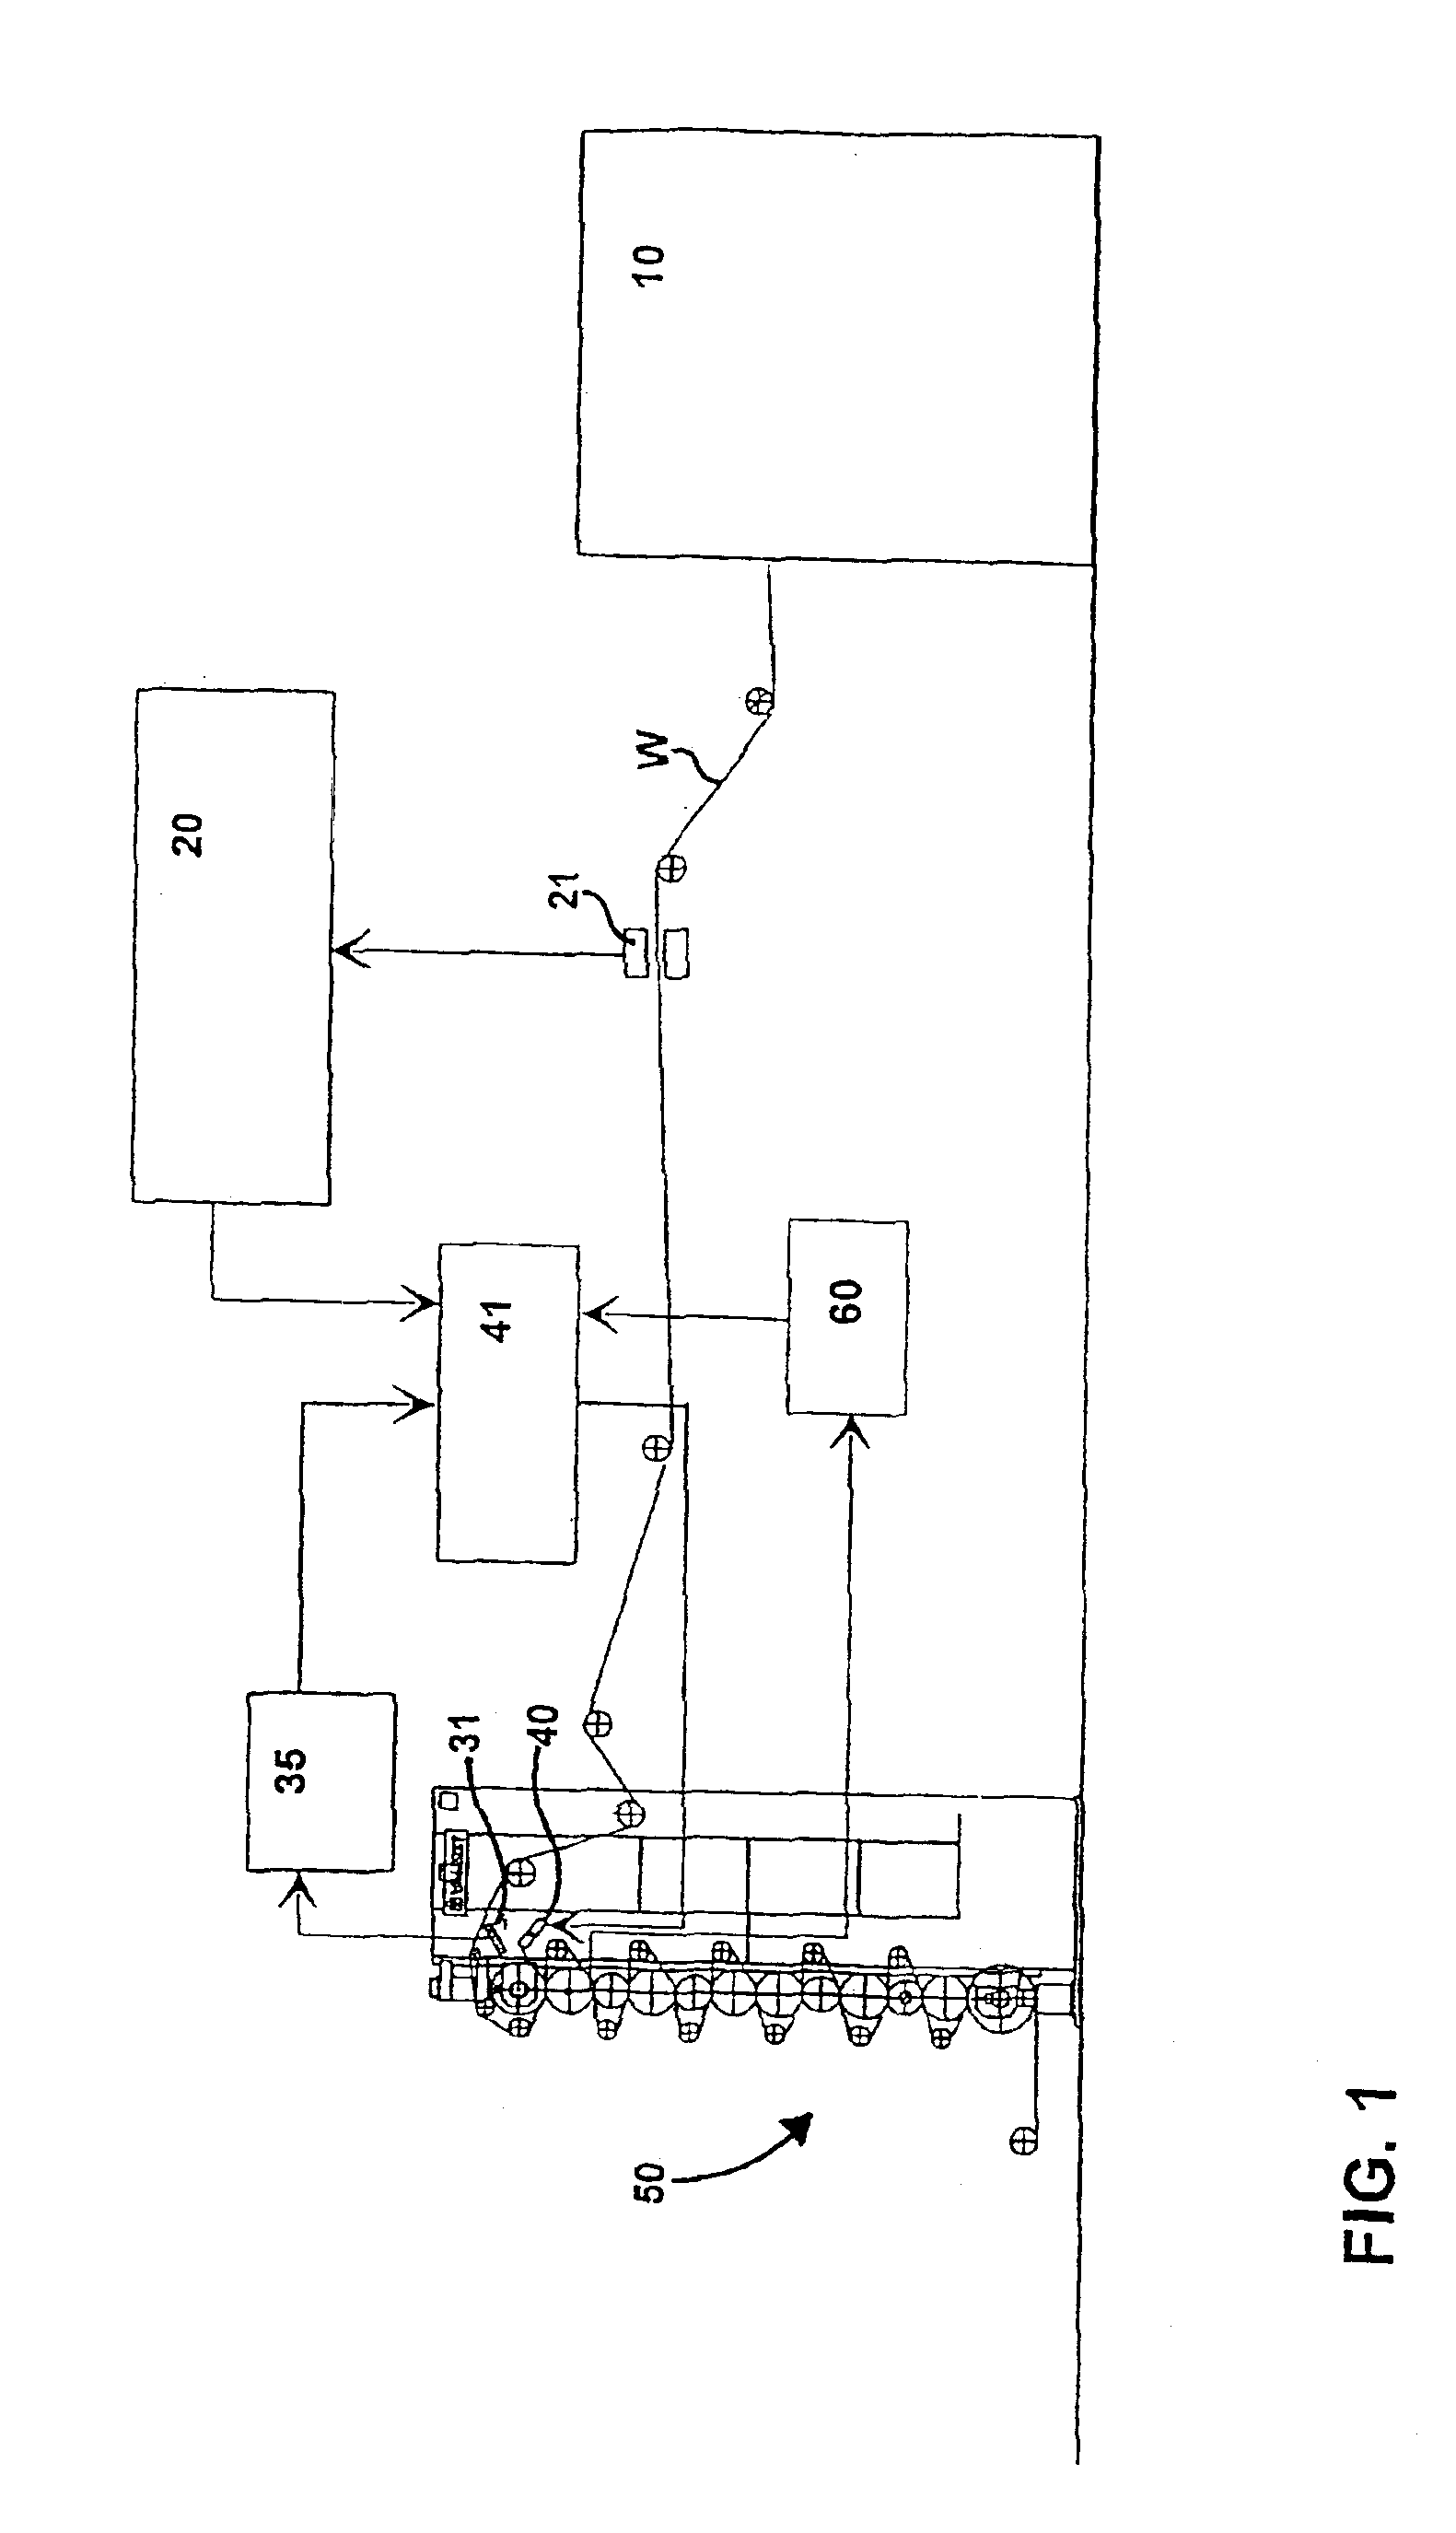 Method and equipment for cleaning and maintaining rolls